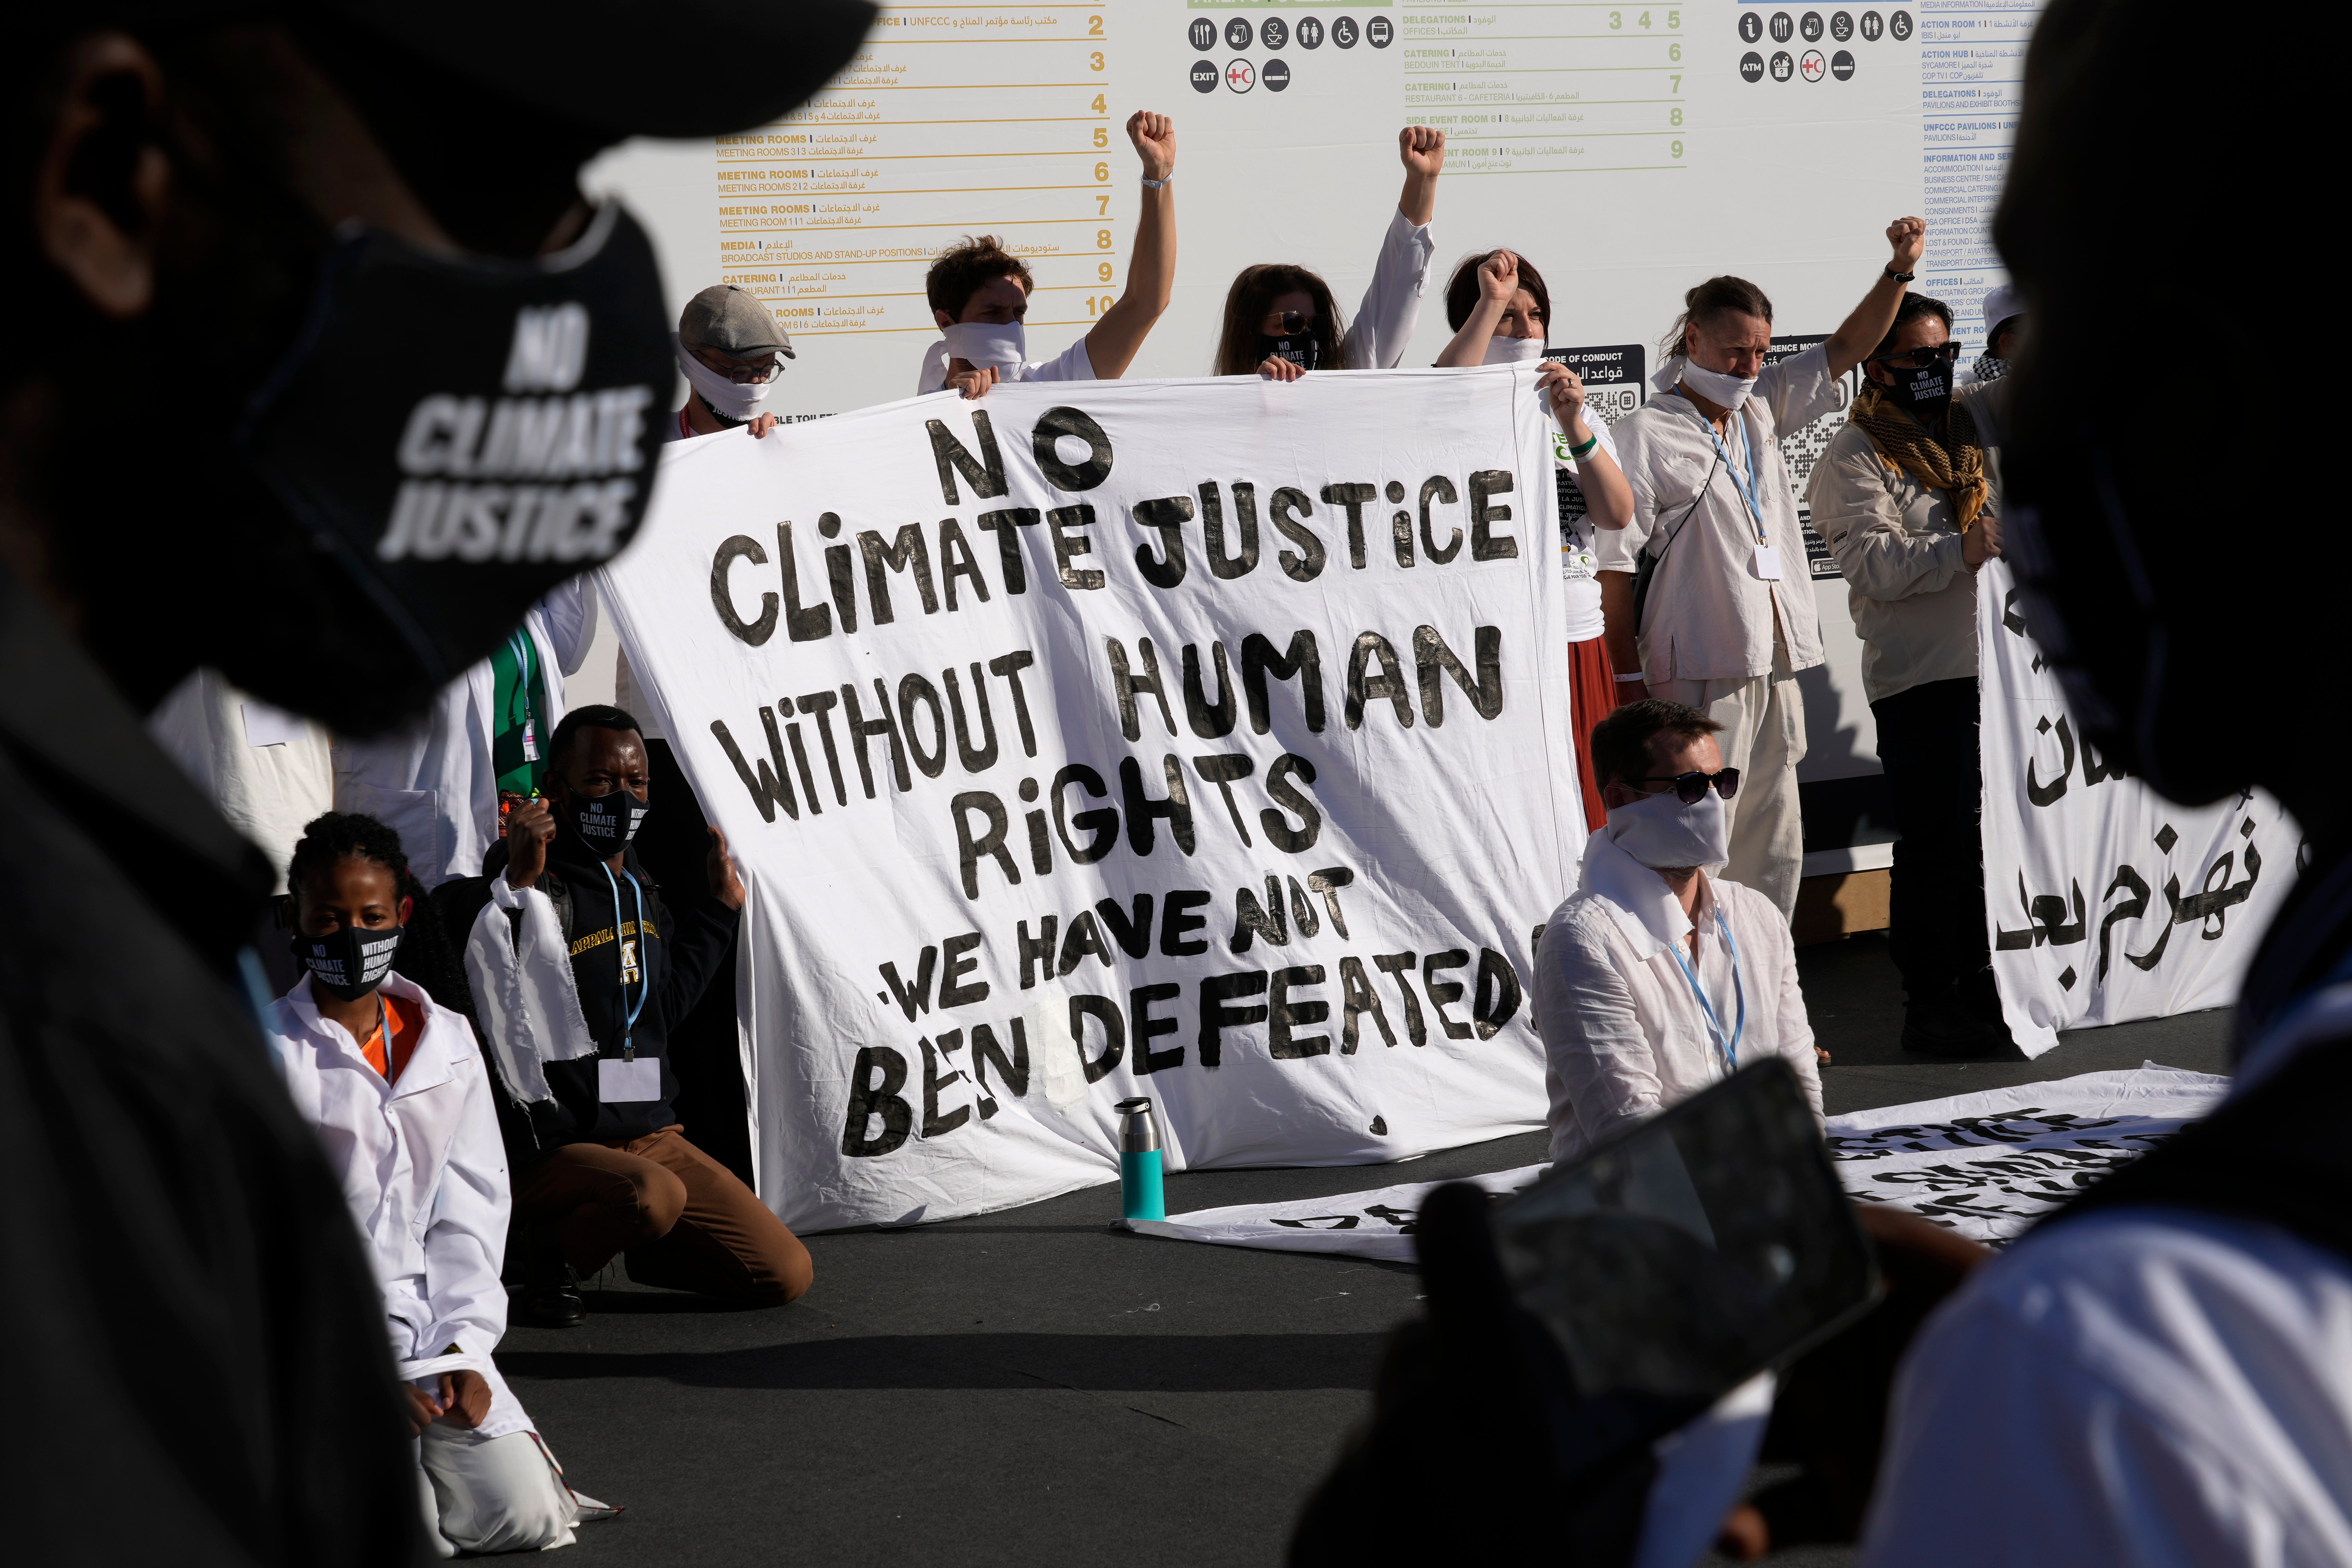 A silent protest for climate justice and human rights at Cop27 in November